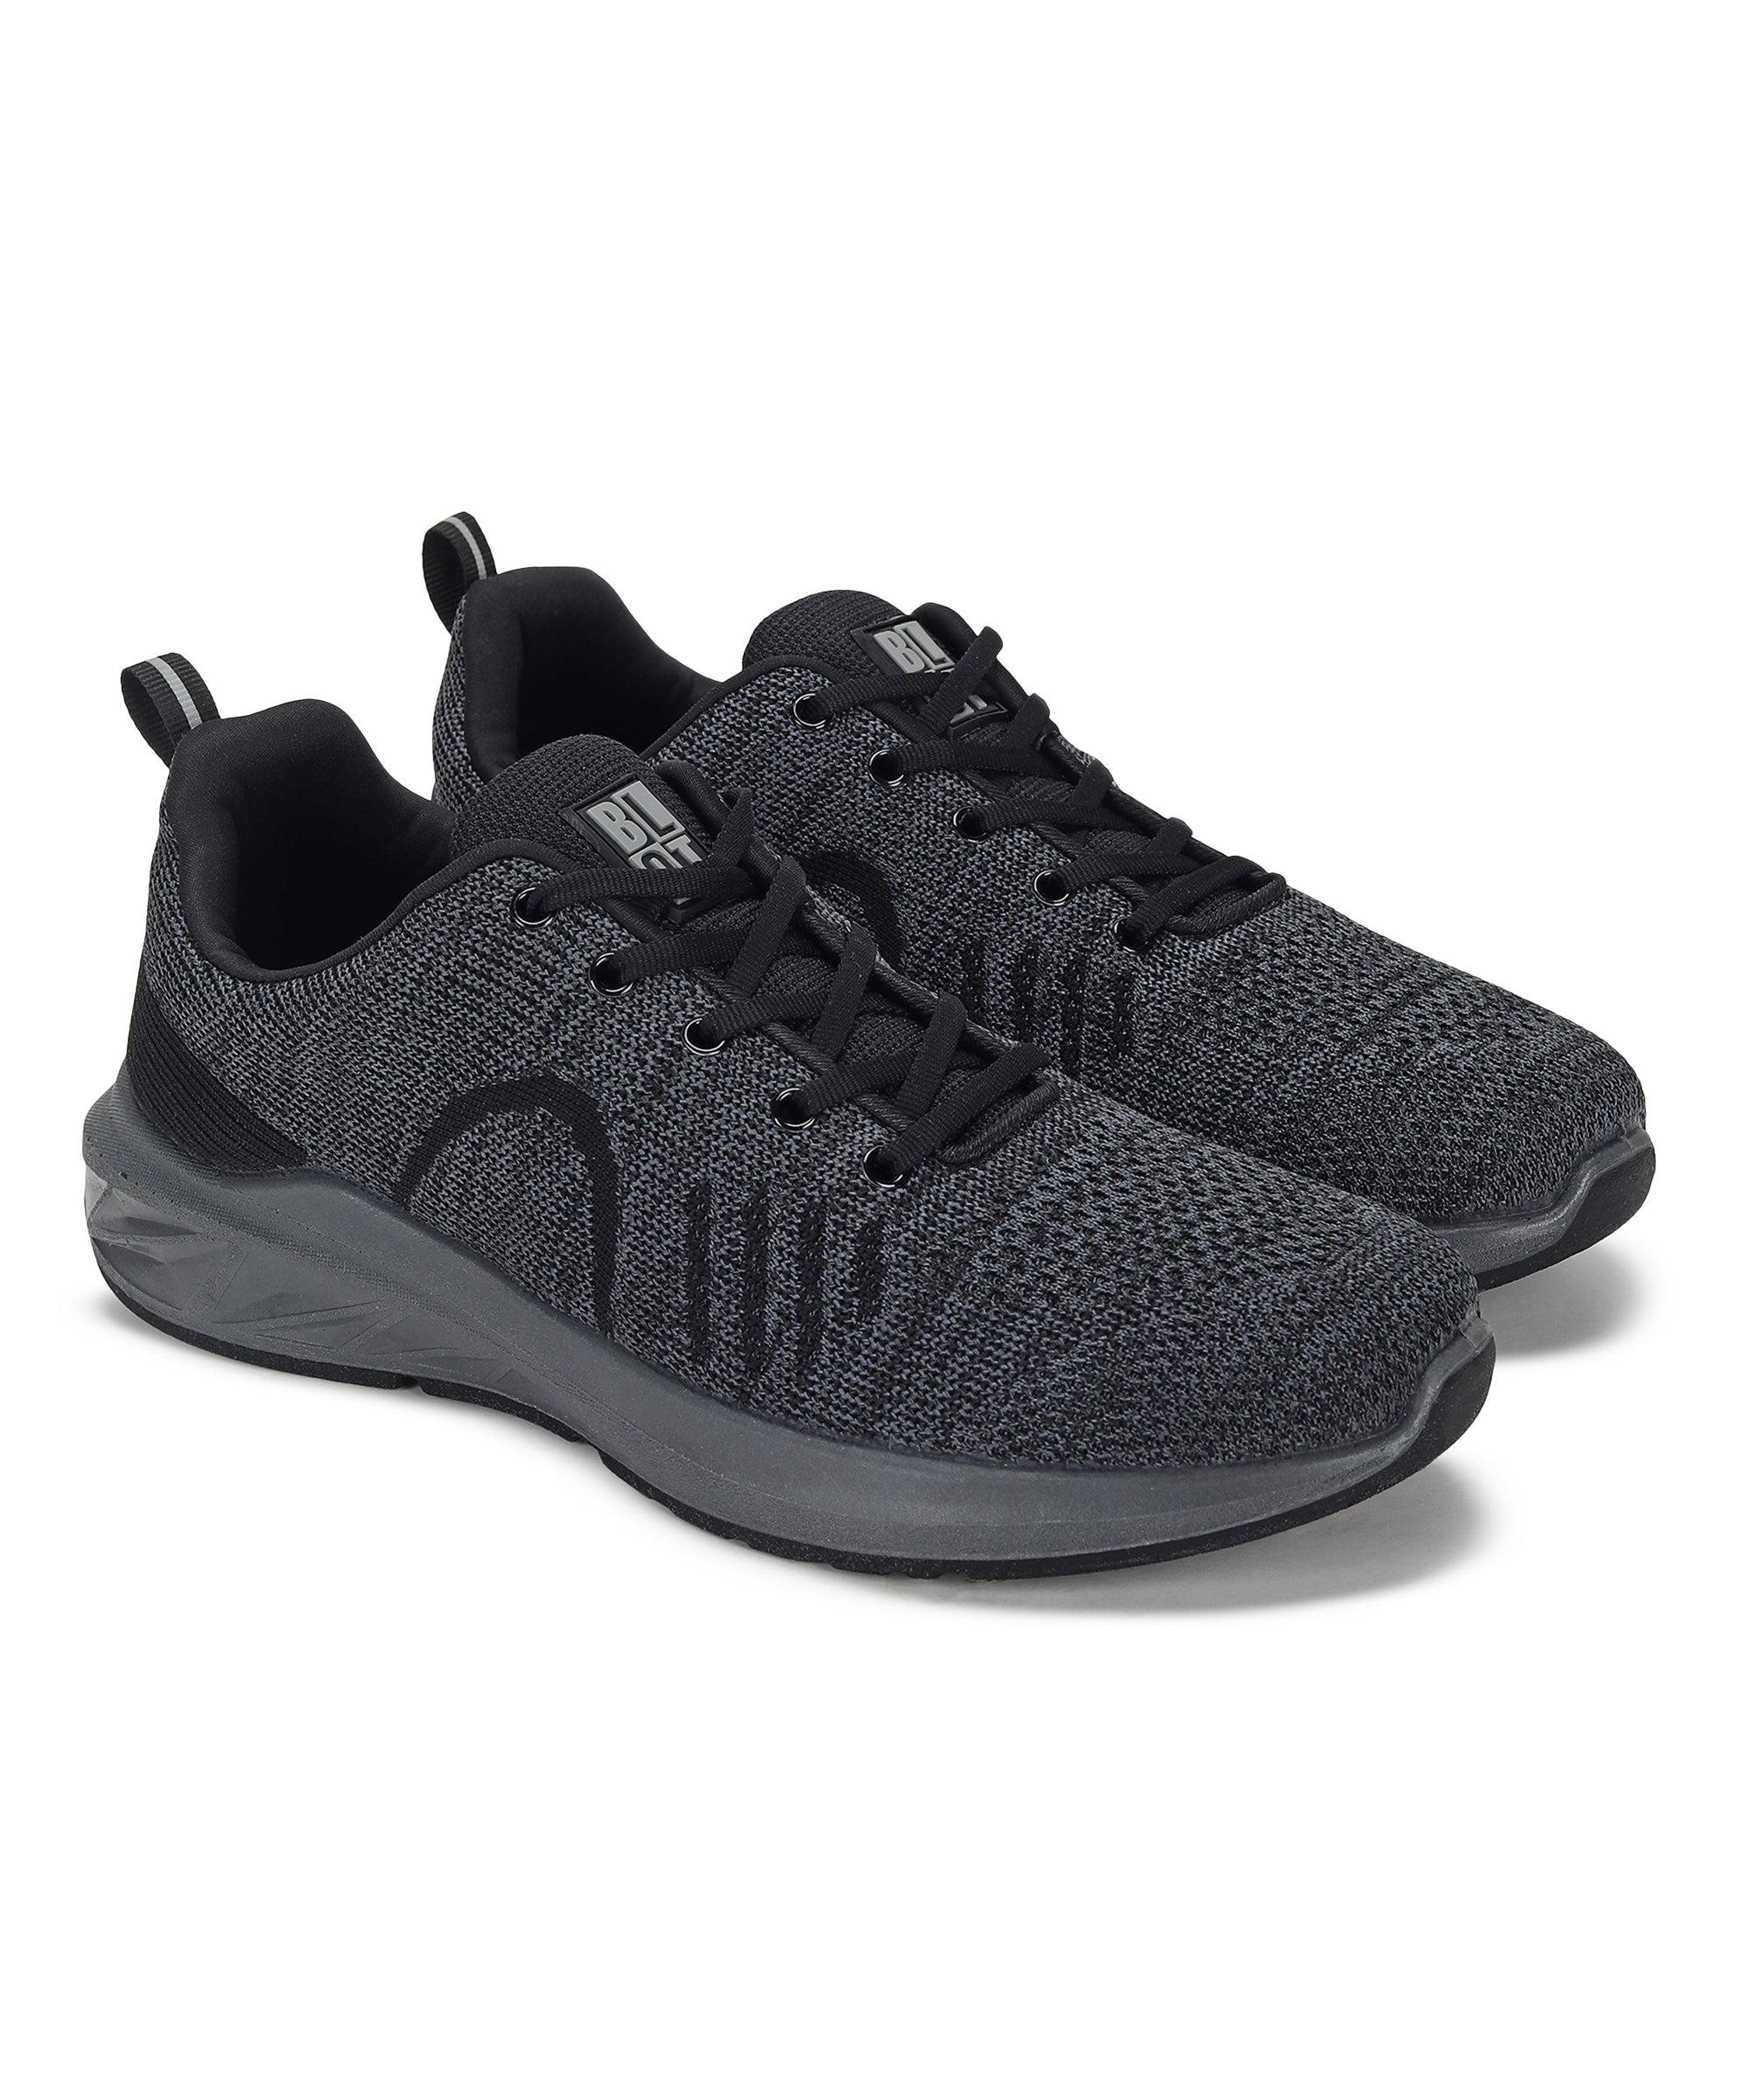 Paragon PUK3502GS Men Sports Shoes Walking Running Training Cricket Gym Shoes | Athletic | Comfortable Cushioned Sole | Daily Outdoor Use Black